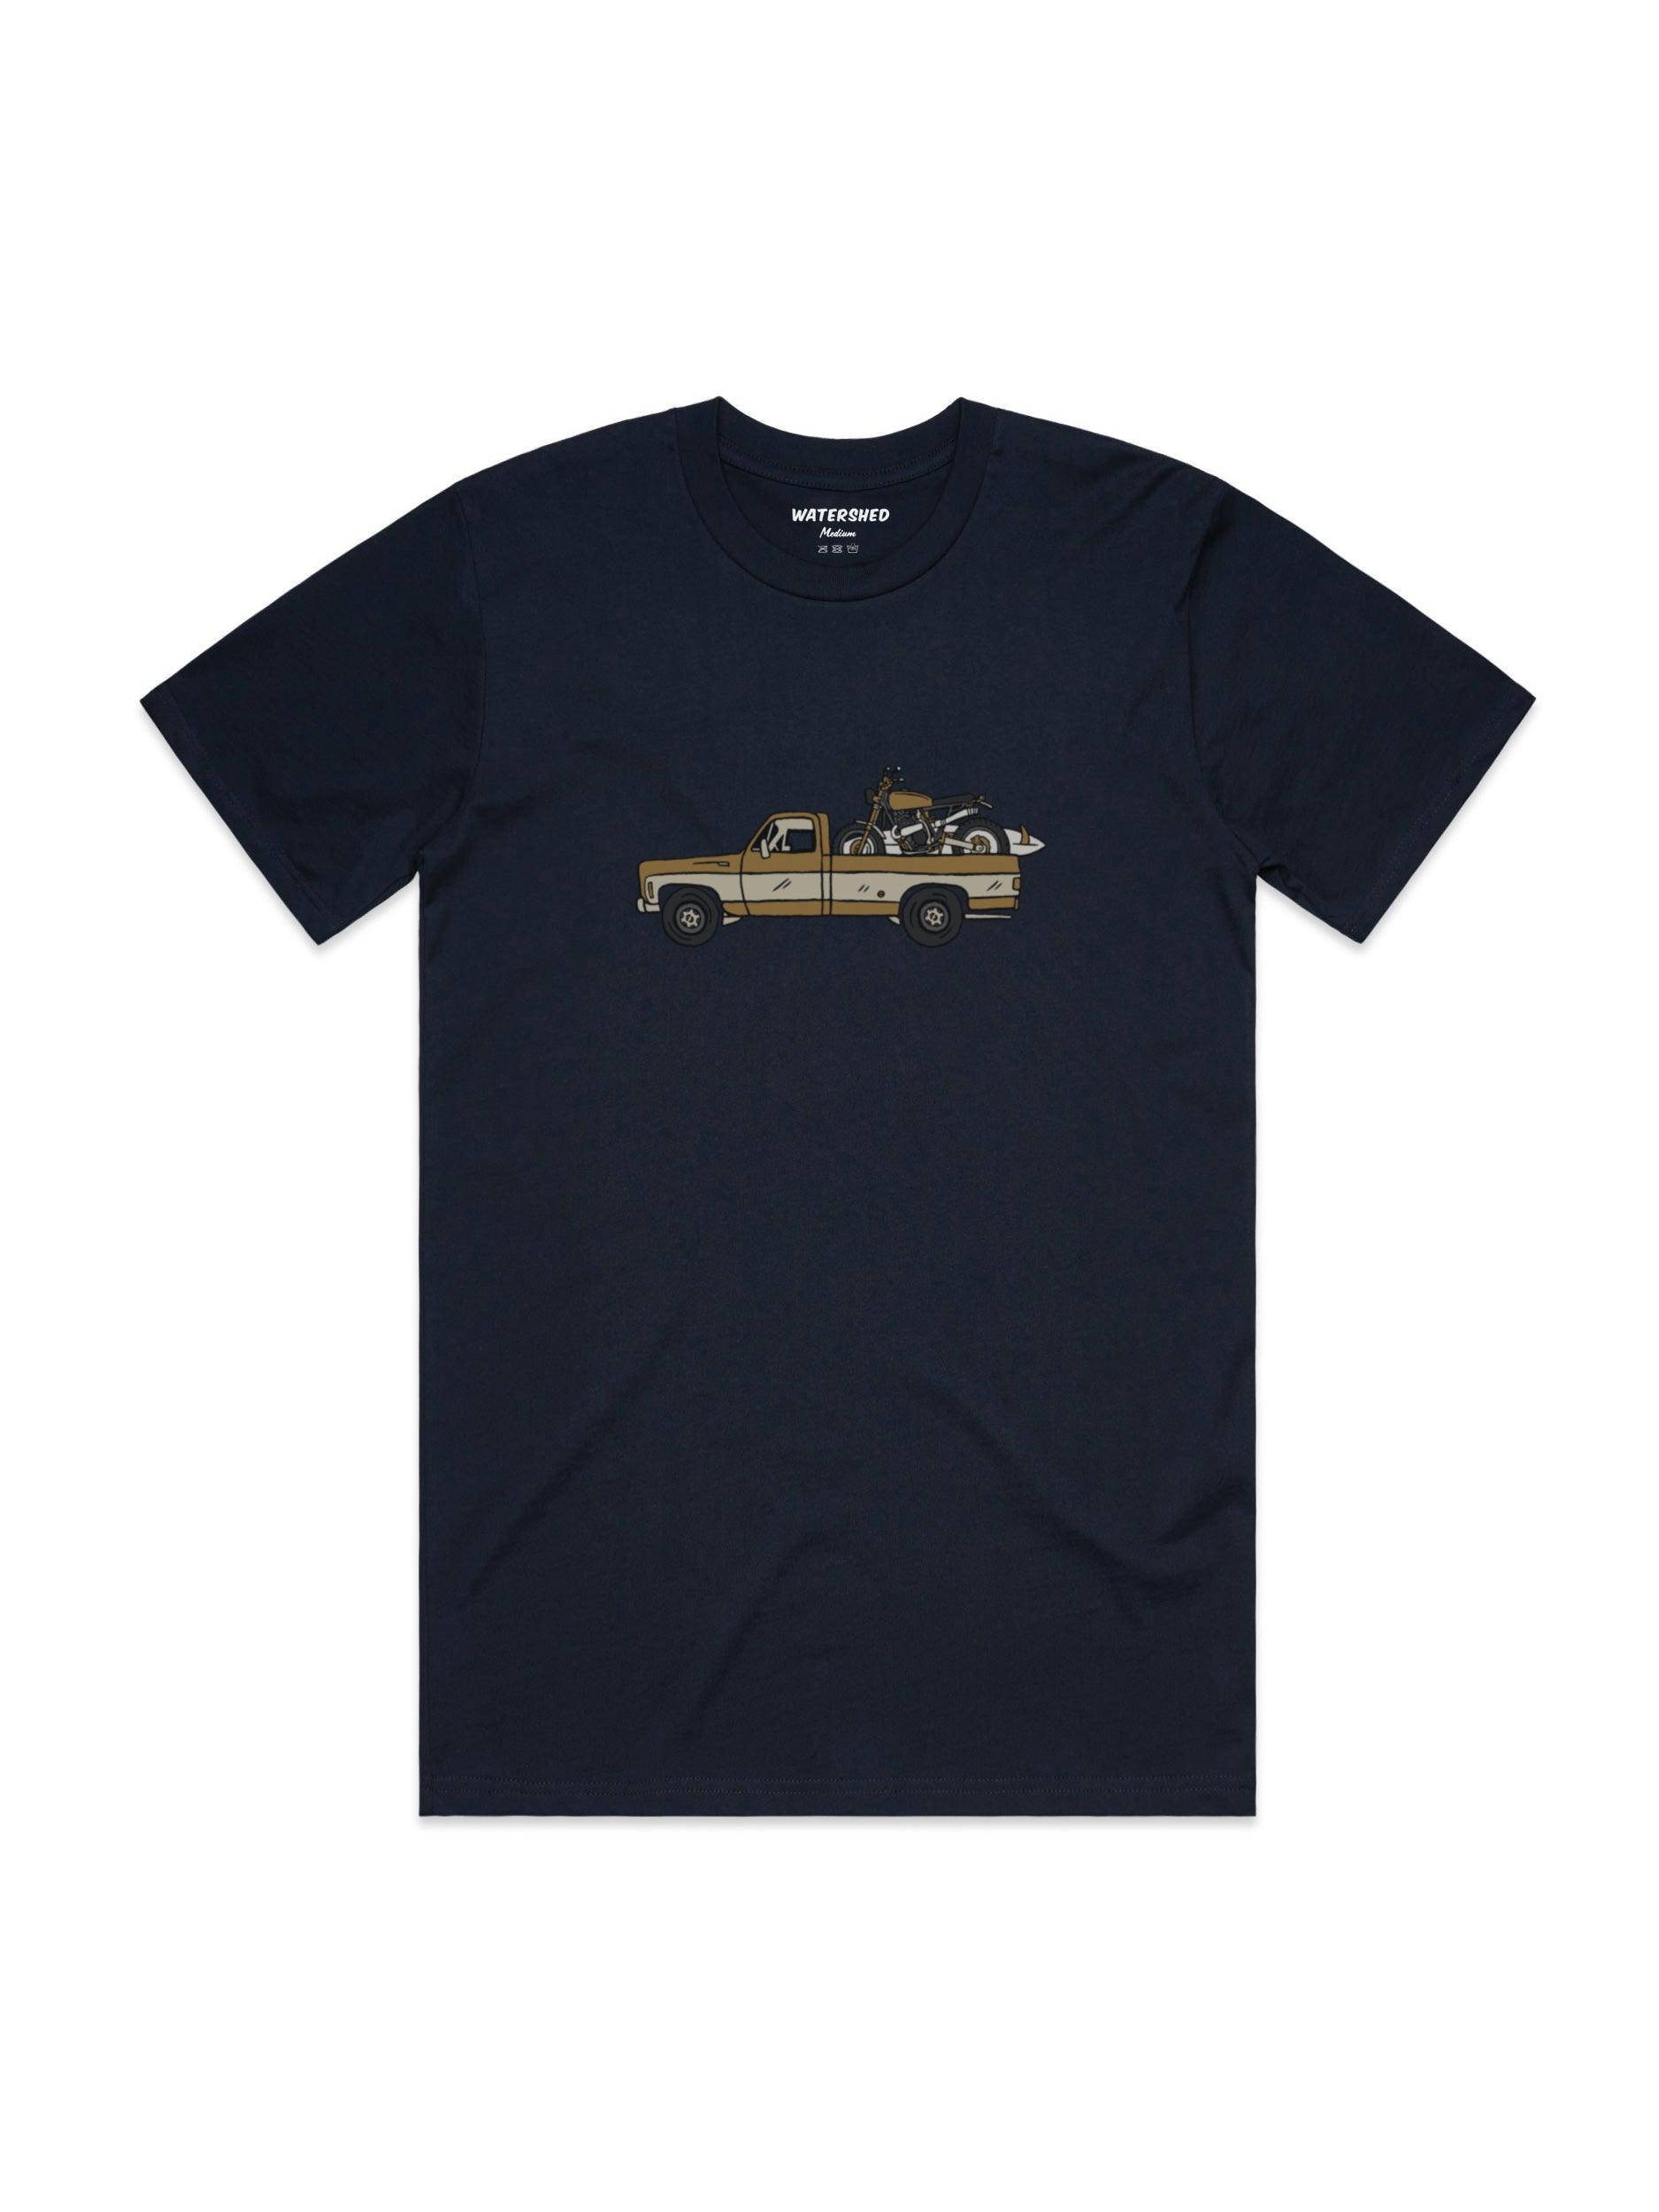 Chevy Truck T-Shirt - Watershed Brand